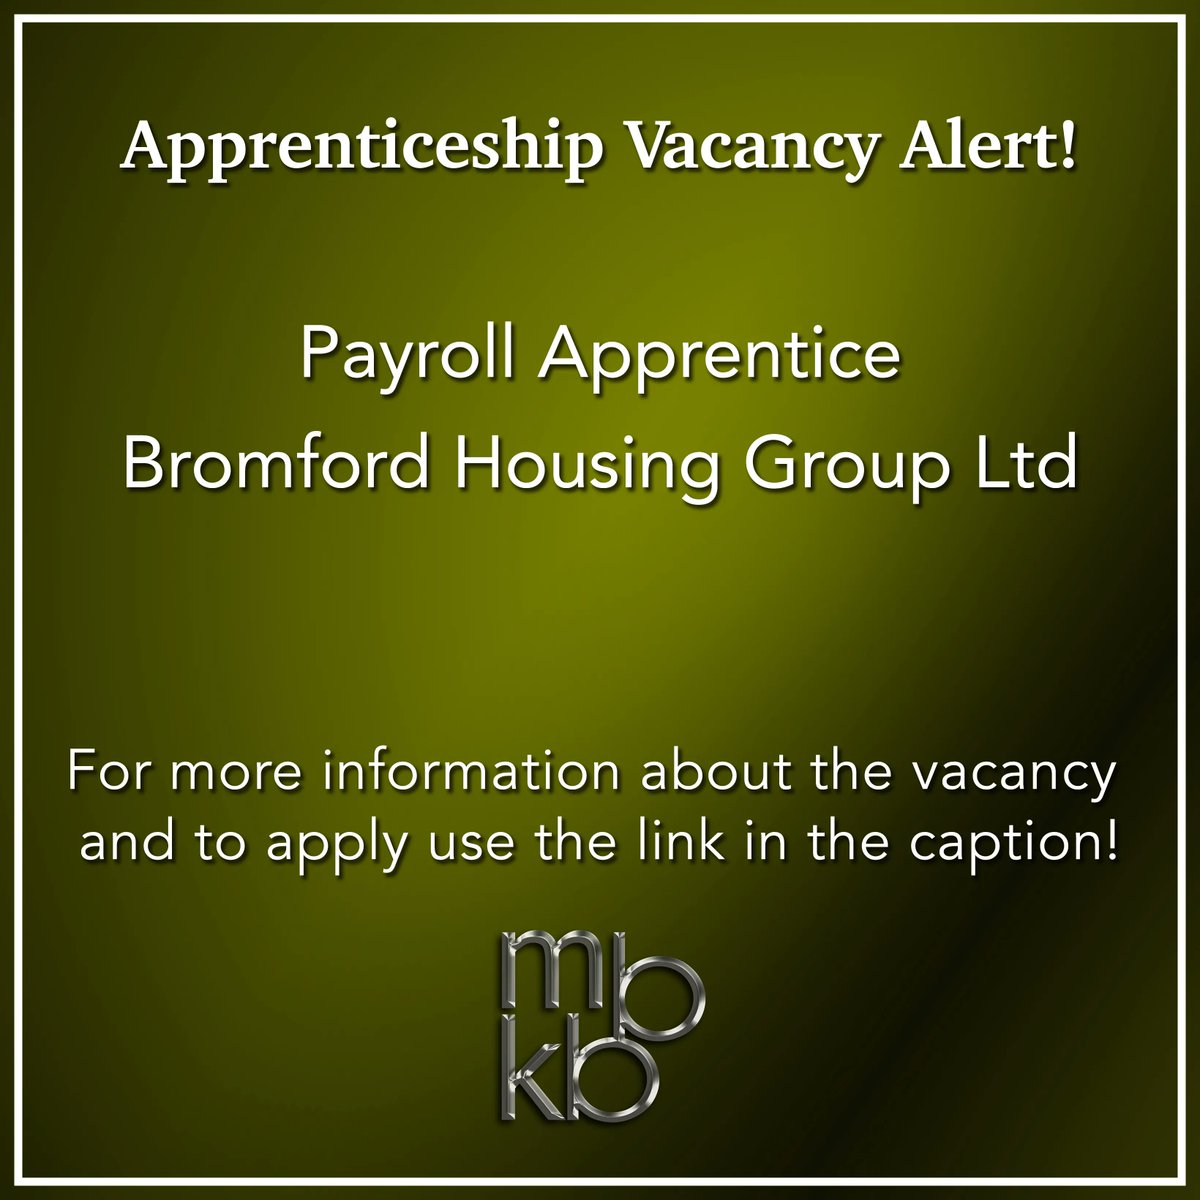 Bromford Housing Group Ltd have a fantastic vacancy for a Payroll Apprentice!

To apply use this link - buff.ly/3rRiUL8

#MBKB #MBKBTraining #OfstedOutstandingTrainingProvider #ApprenticeshipVacancies #ExcitingOpportunity #PayrollApprentice #BromfordHousingGroupLtd